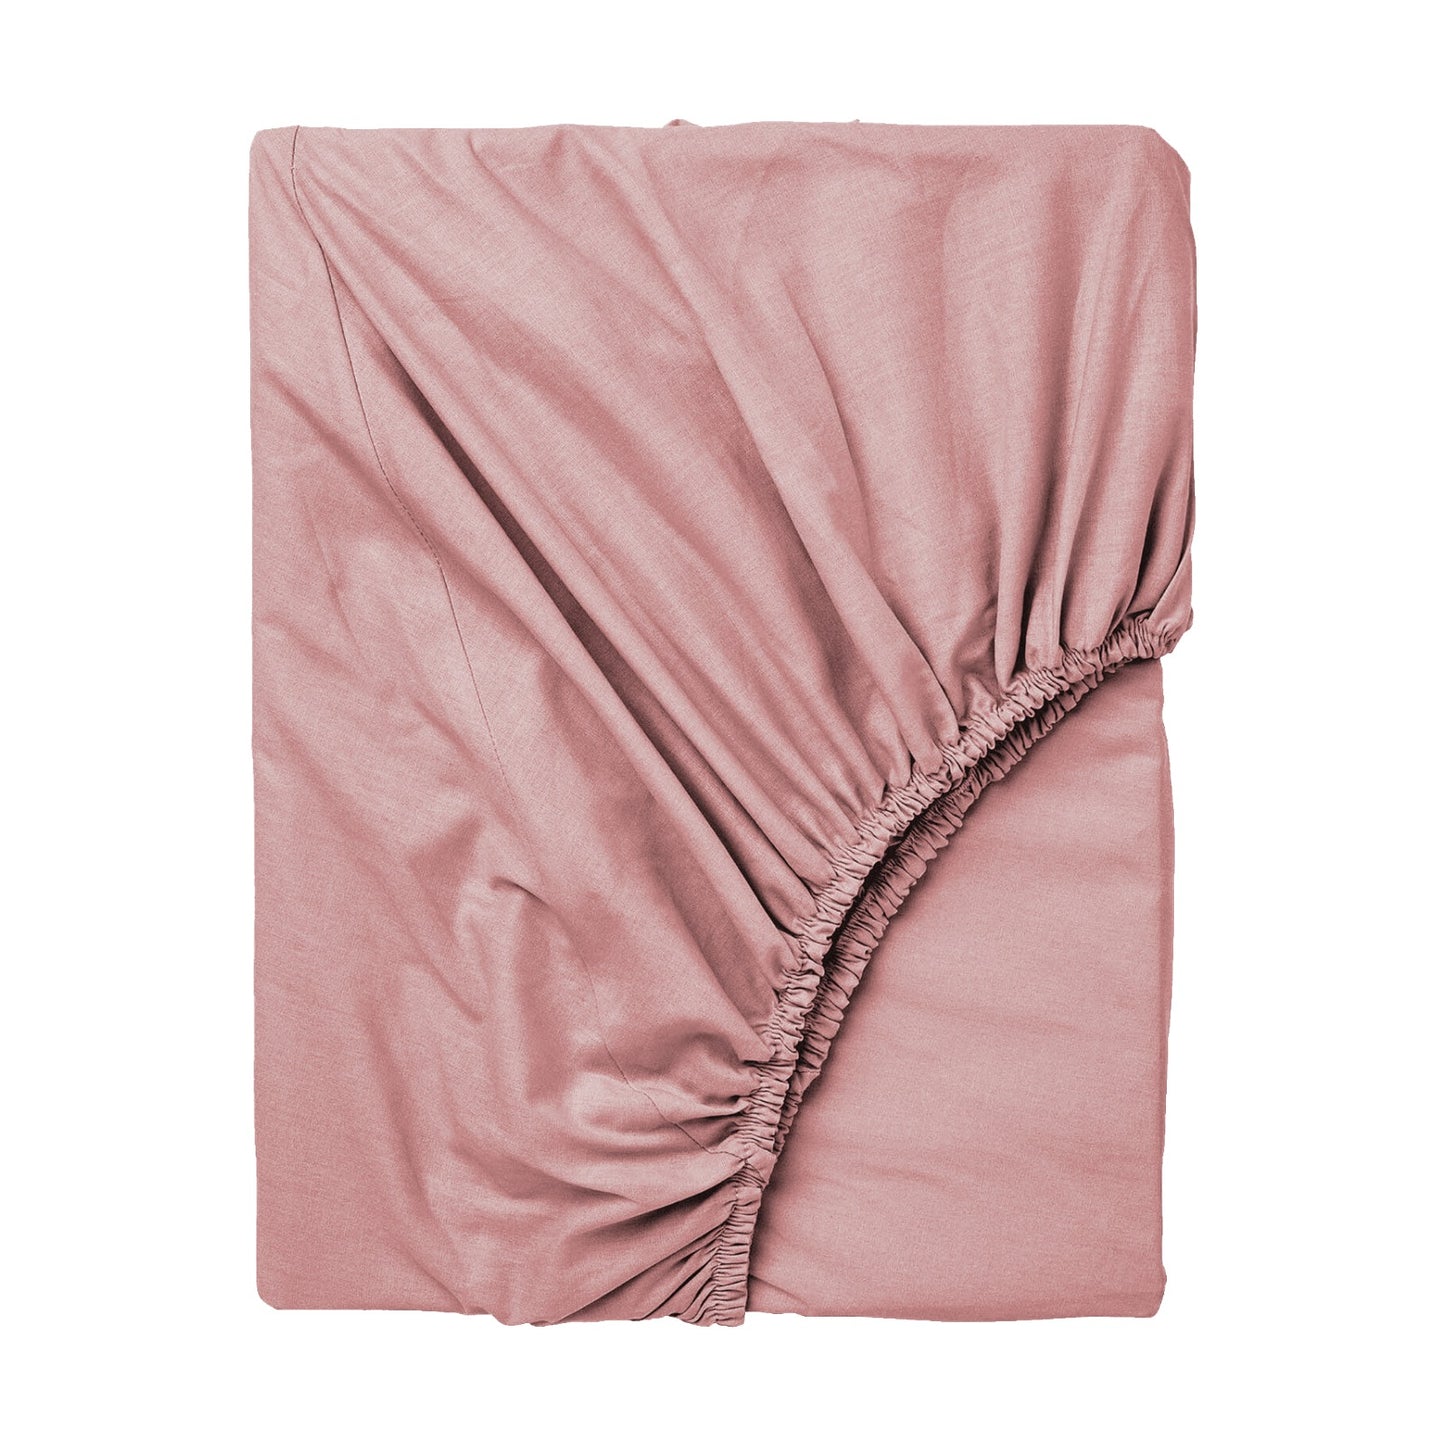 Tea pink - Fitted sheet - King size (3-pcs)